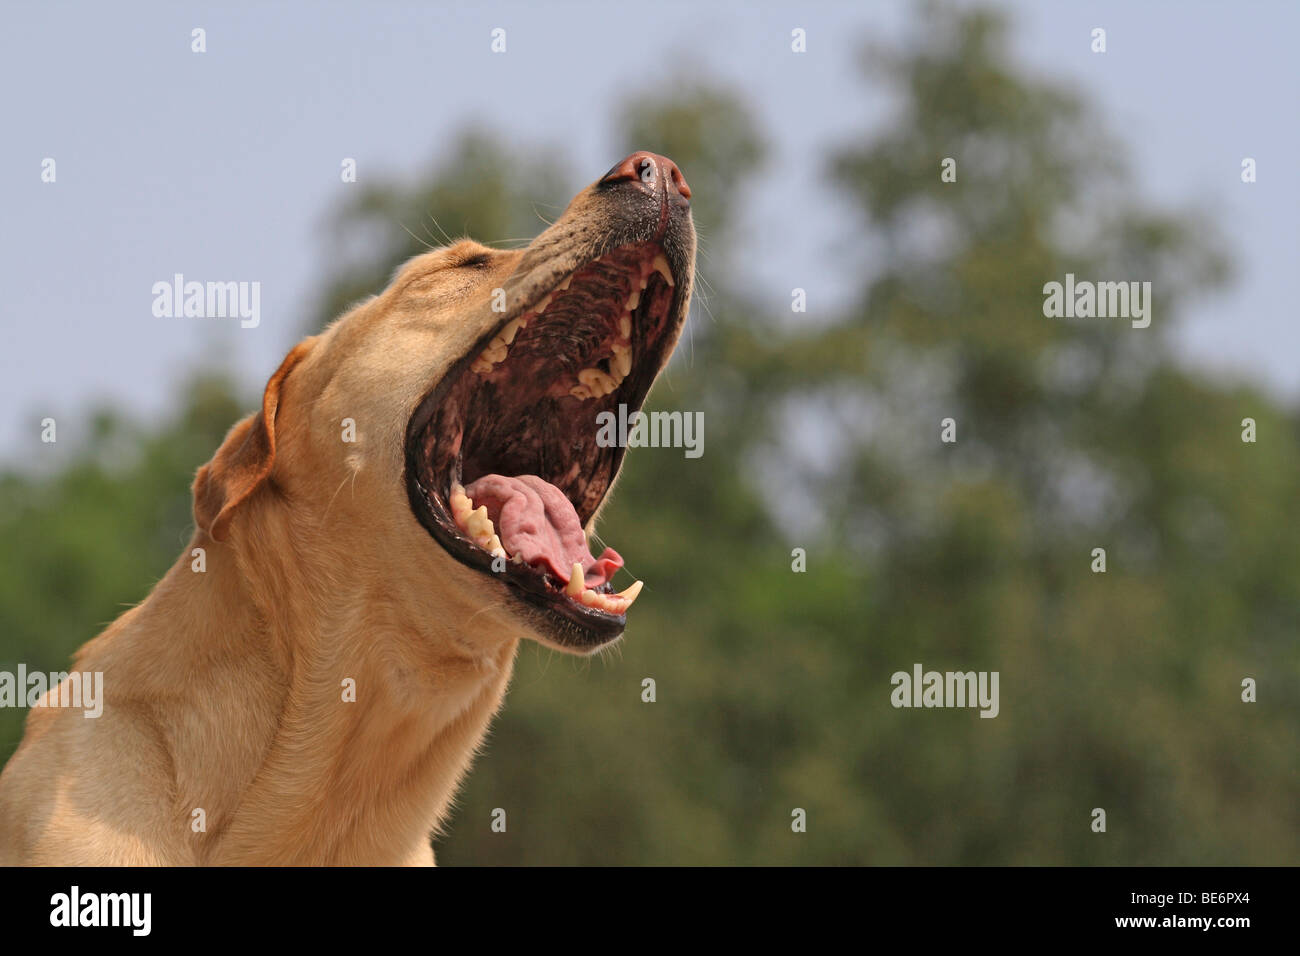 Labrador Retriever opening its mouth wide, yawning Stock Photo